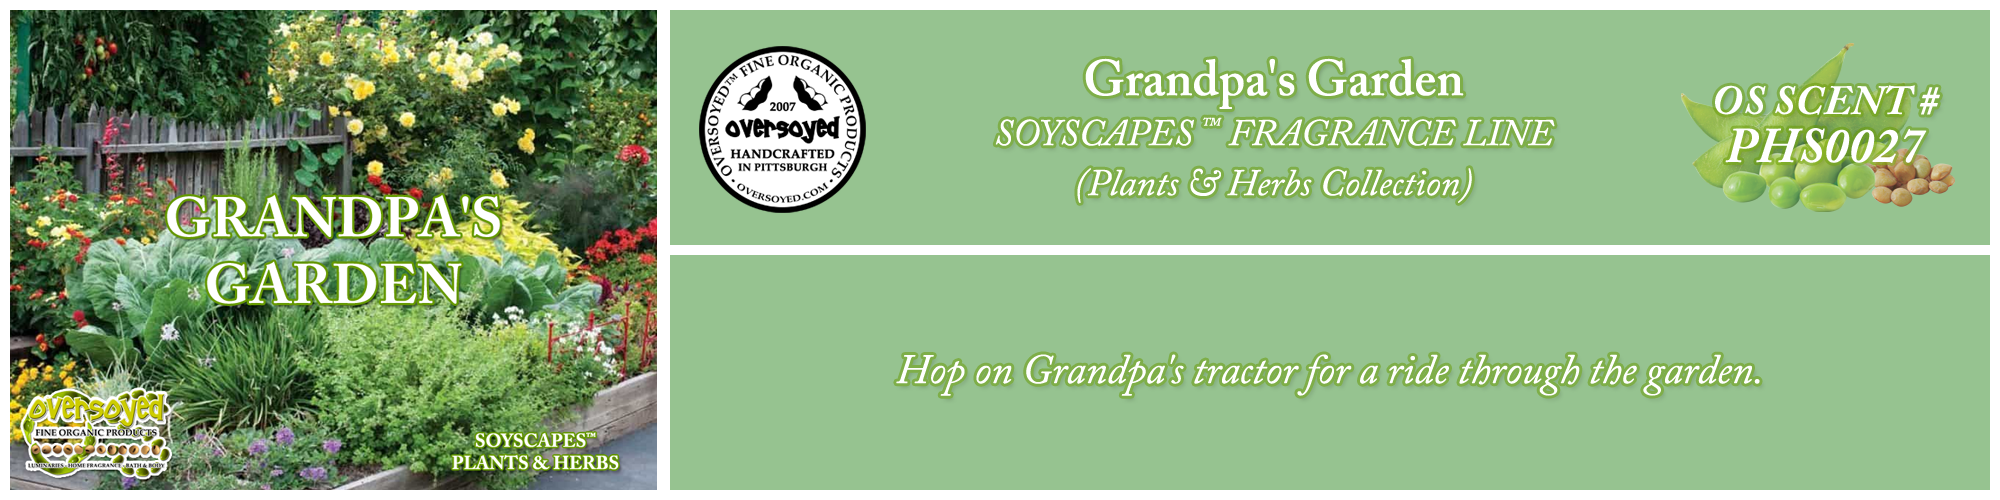 Grandpa's Garden Handcrafted Products Collection